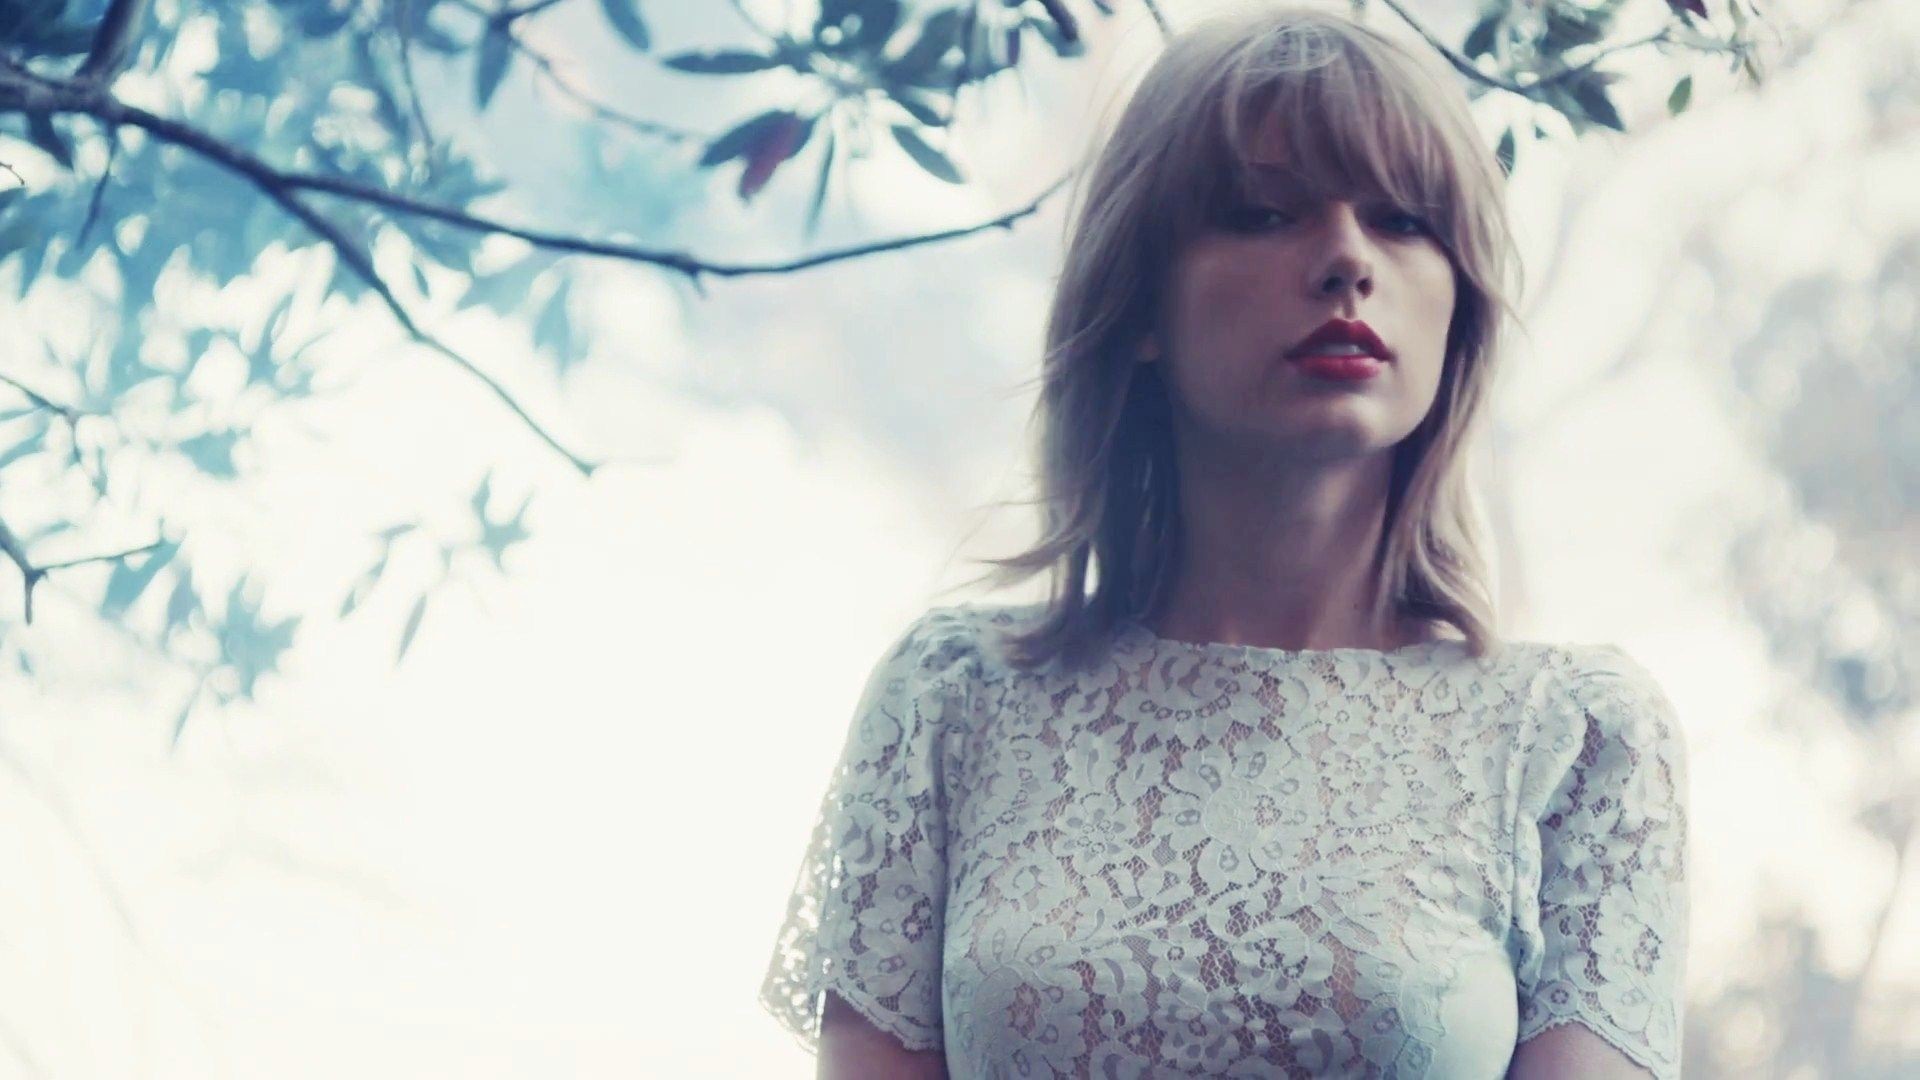 1920x1080 High Quality Taylor Swift Wallpapers Widescreen, UHT.86 .